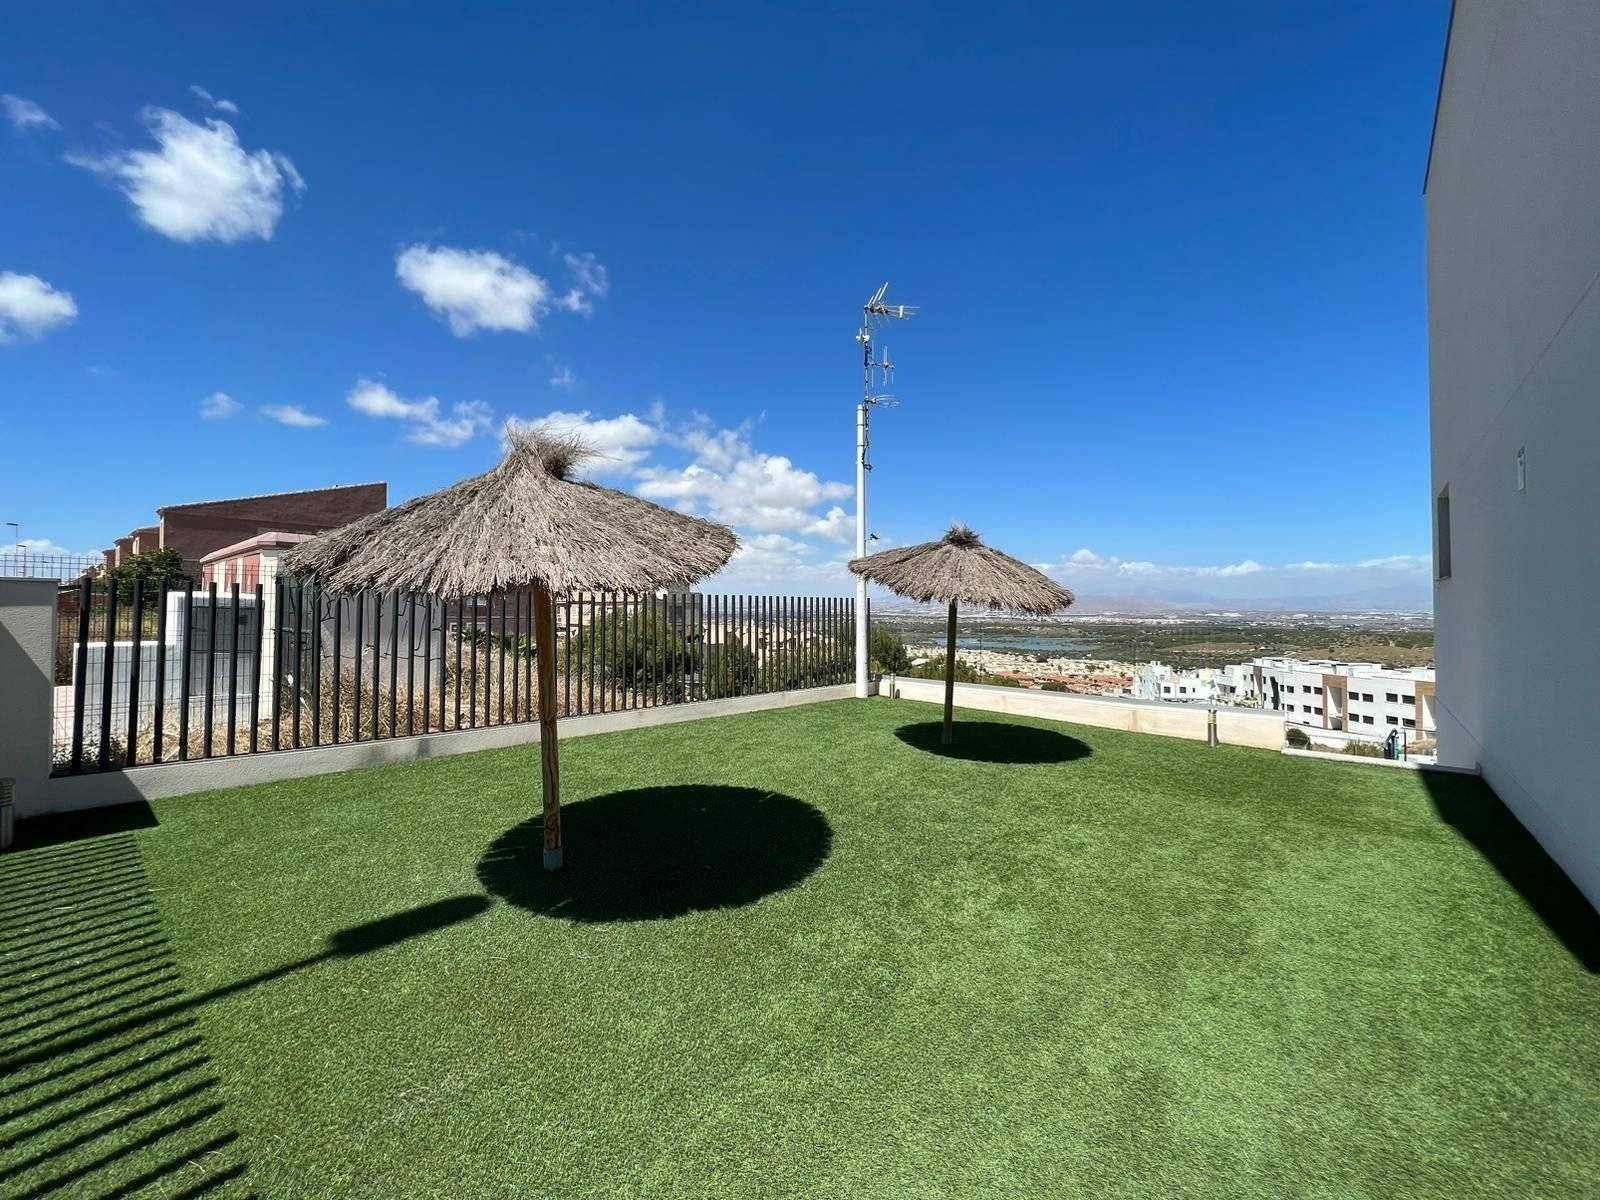 MAGNIFICENT LOWER APARTMENT WITH LARGE TERRACE OVERLOOKING THE SEA IN GRAN ALACANT